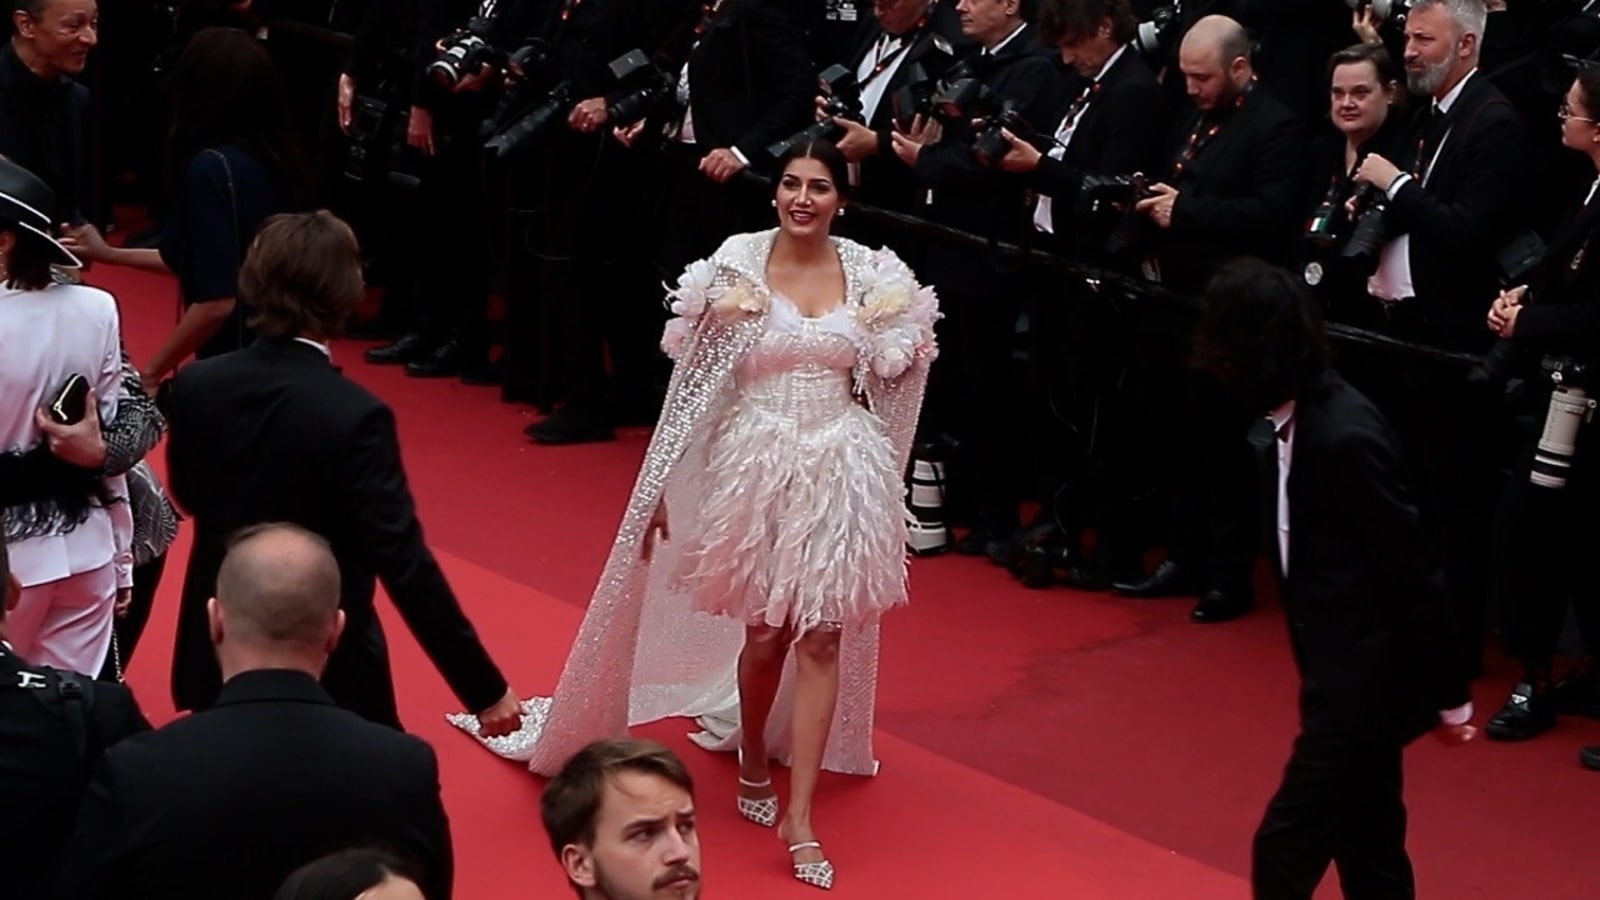 After Cannes debut, Sapna Choudhary walks red carpet again in short white dress | Bollywood